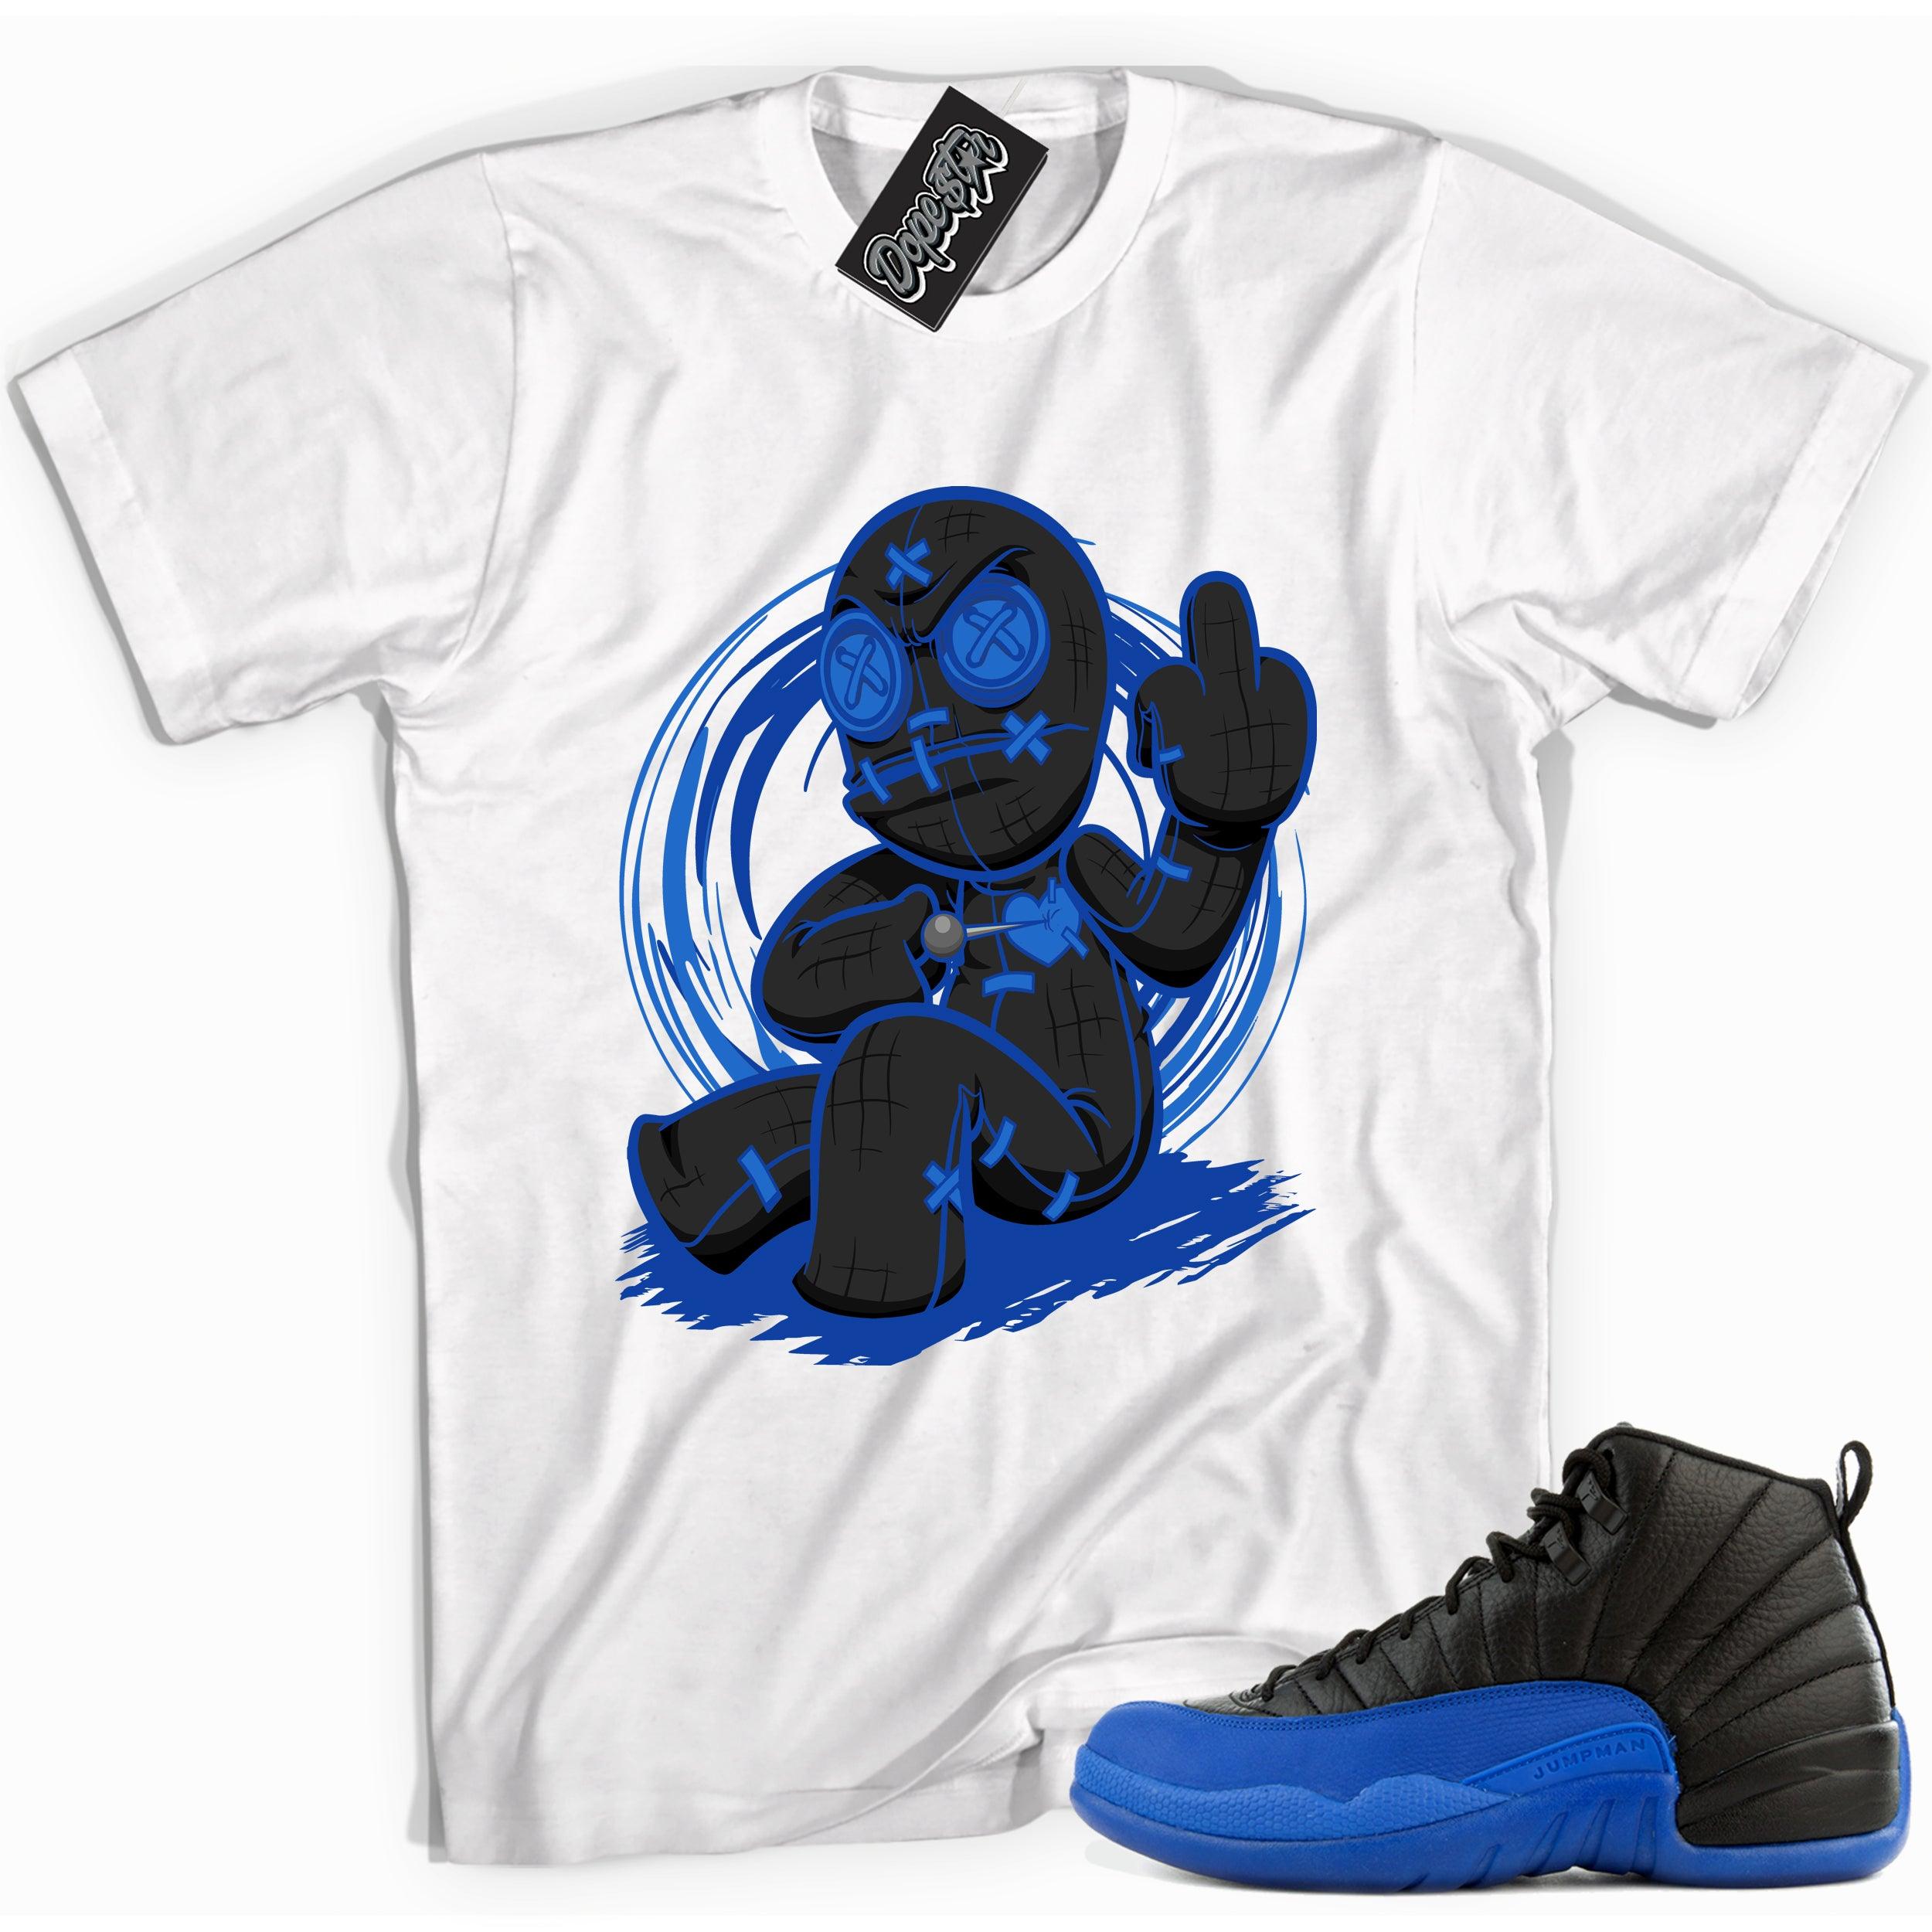 Cool white graphic tee with 'voodoo' print, that perfectly matches Air Jordan 12 Retro Black Game Royal sneakers.